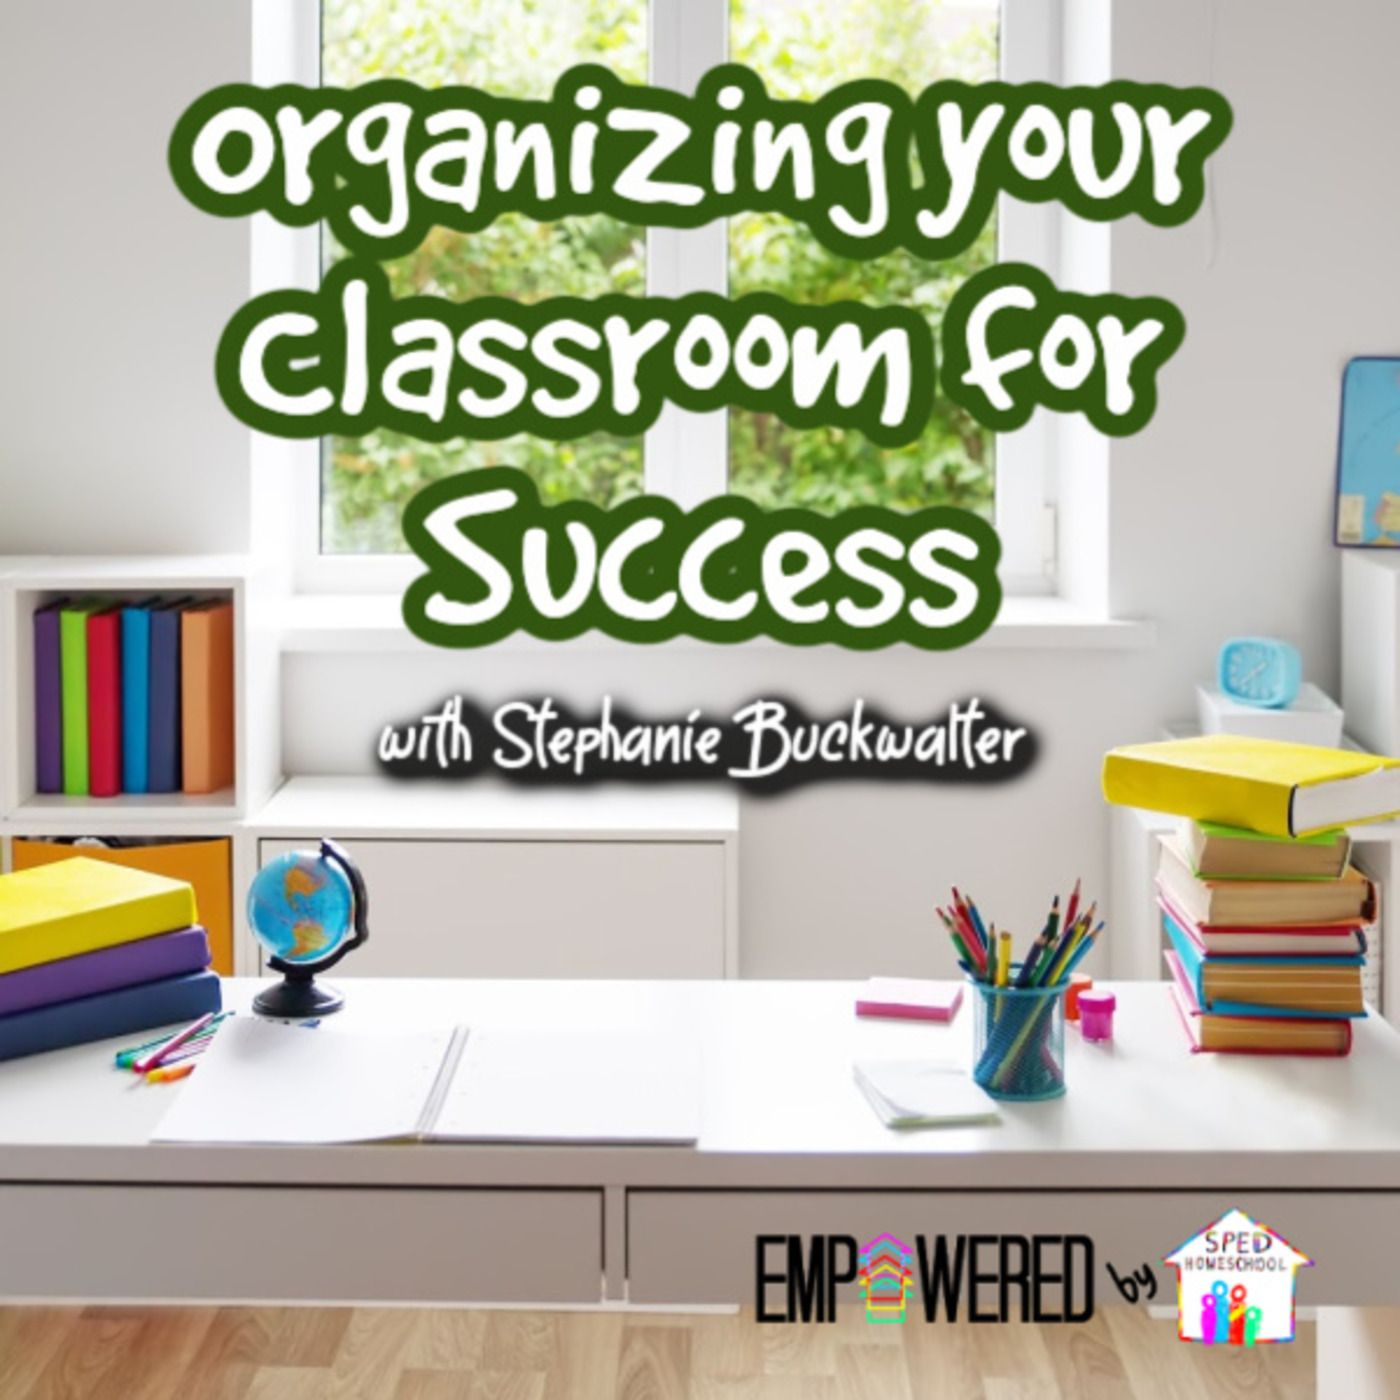 Episode 143: Organizing your Classroom for Success